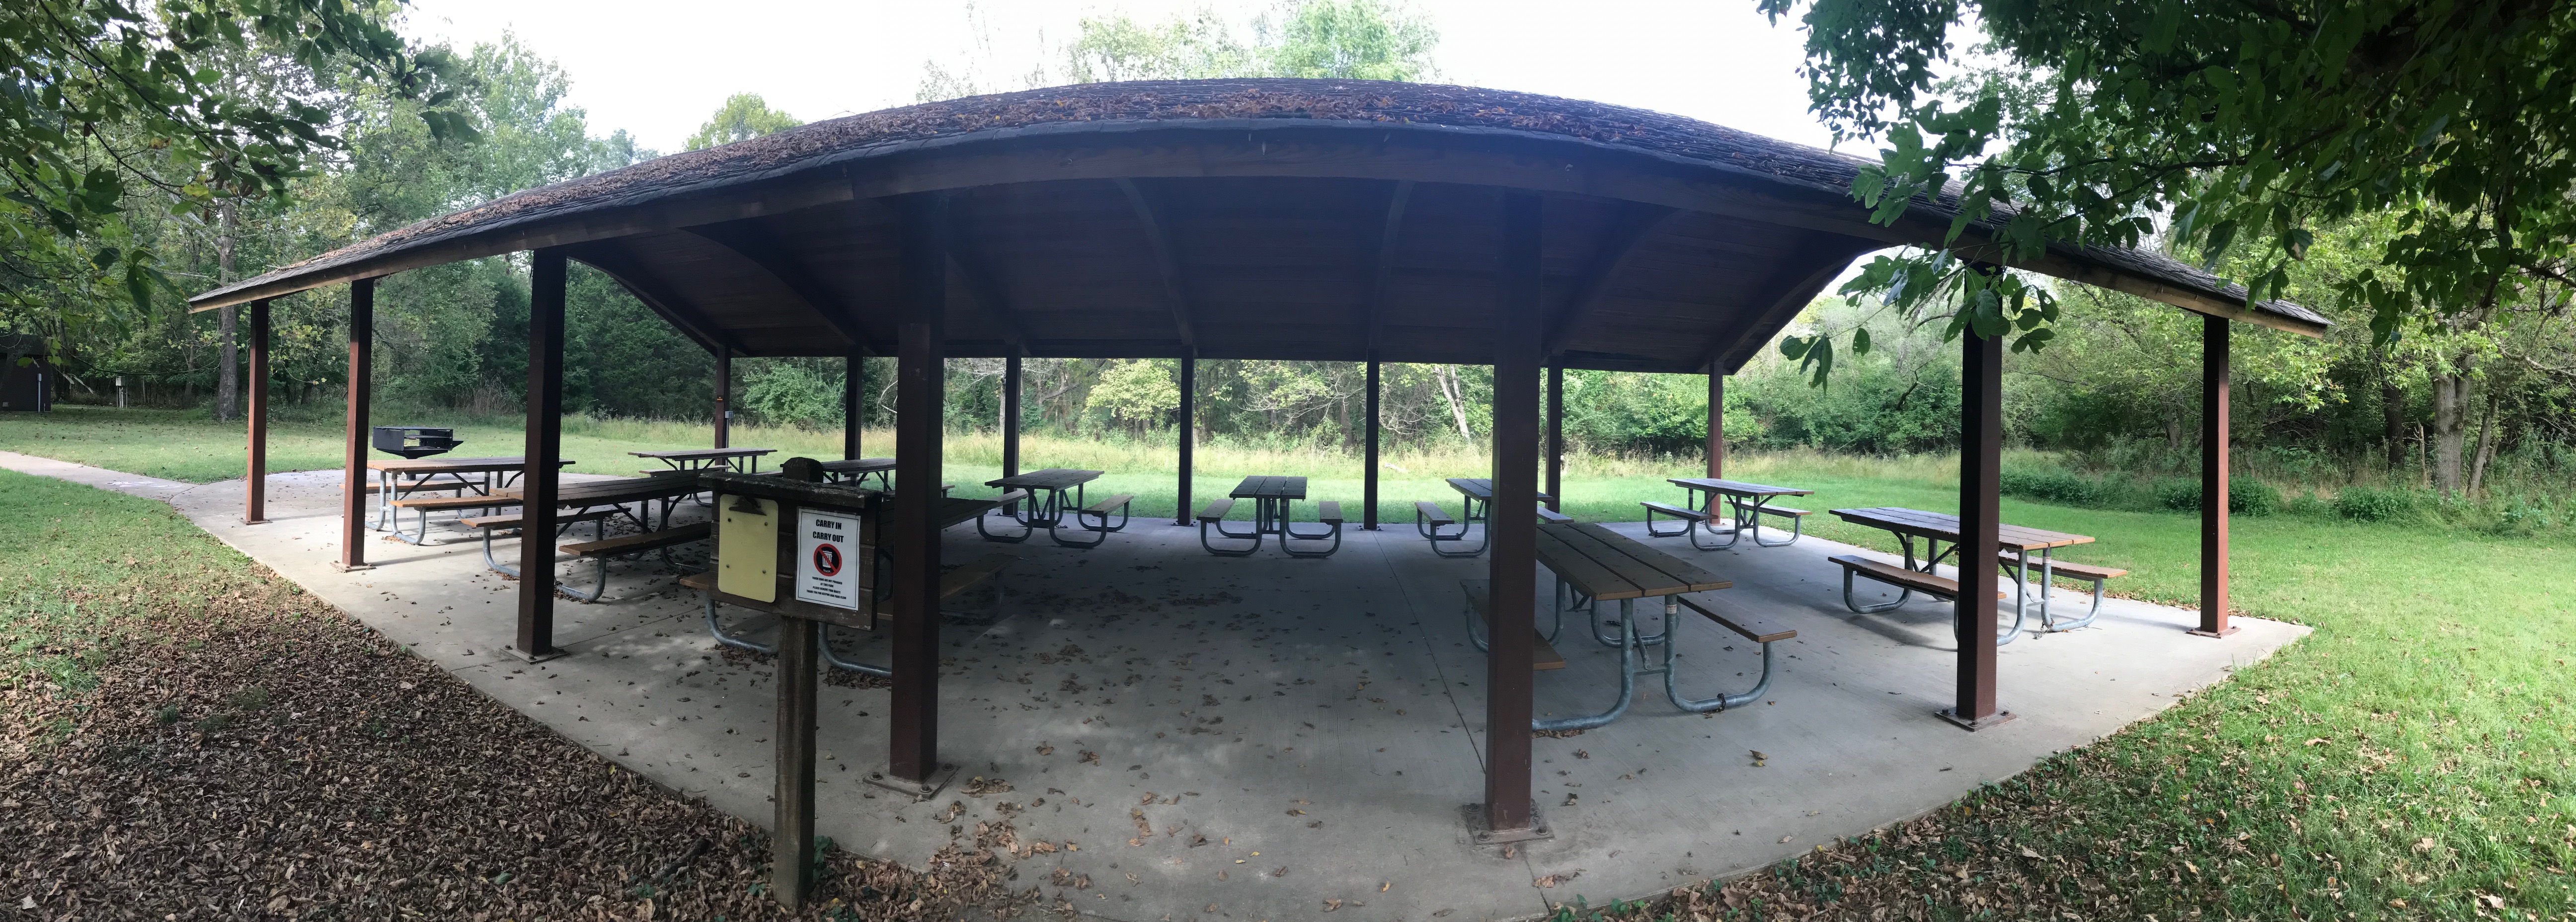 Panoramic view of an open shelter, with several picnic tables under the shelter roof and a grill to the left